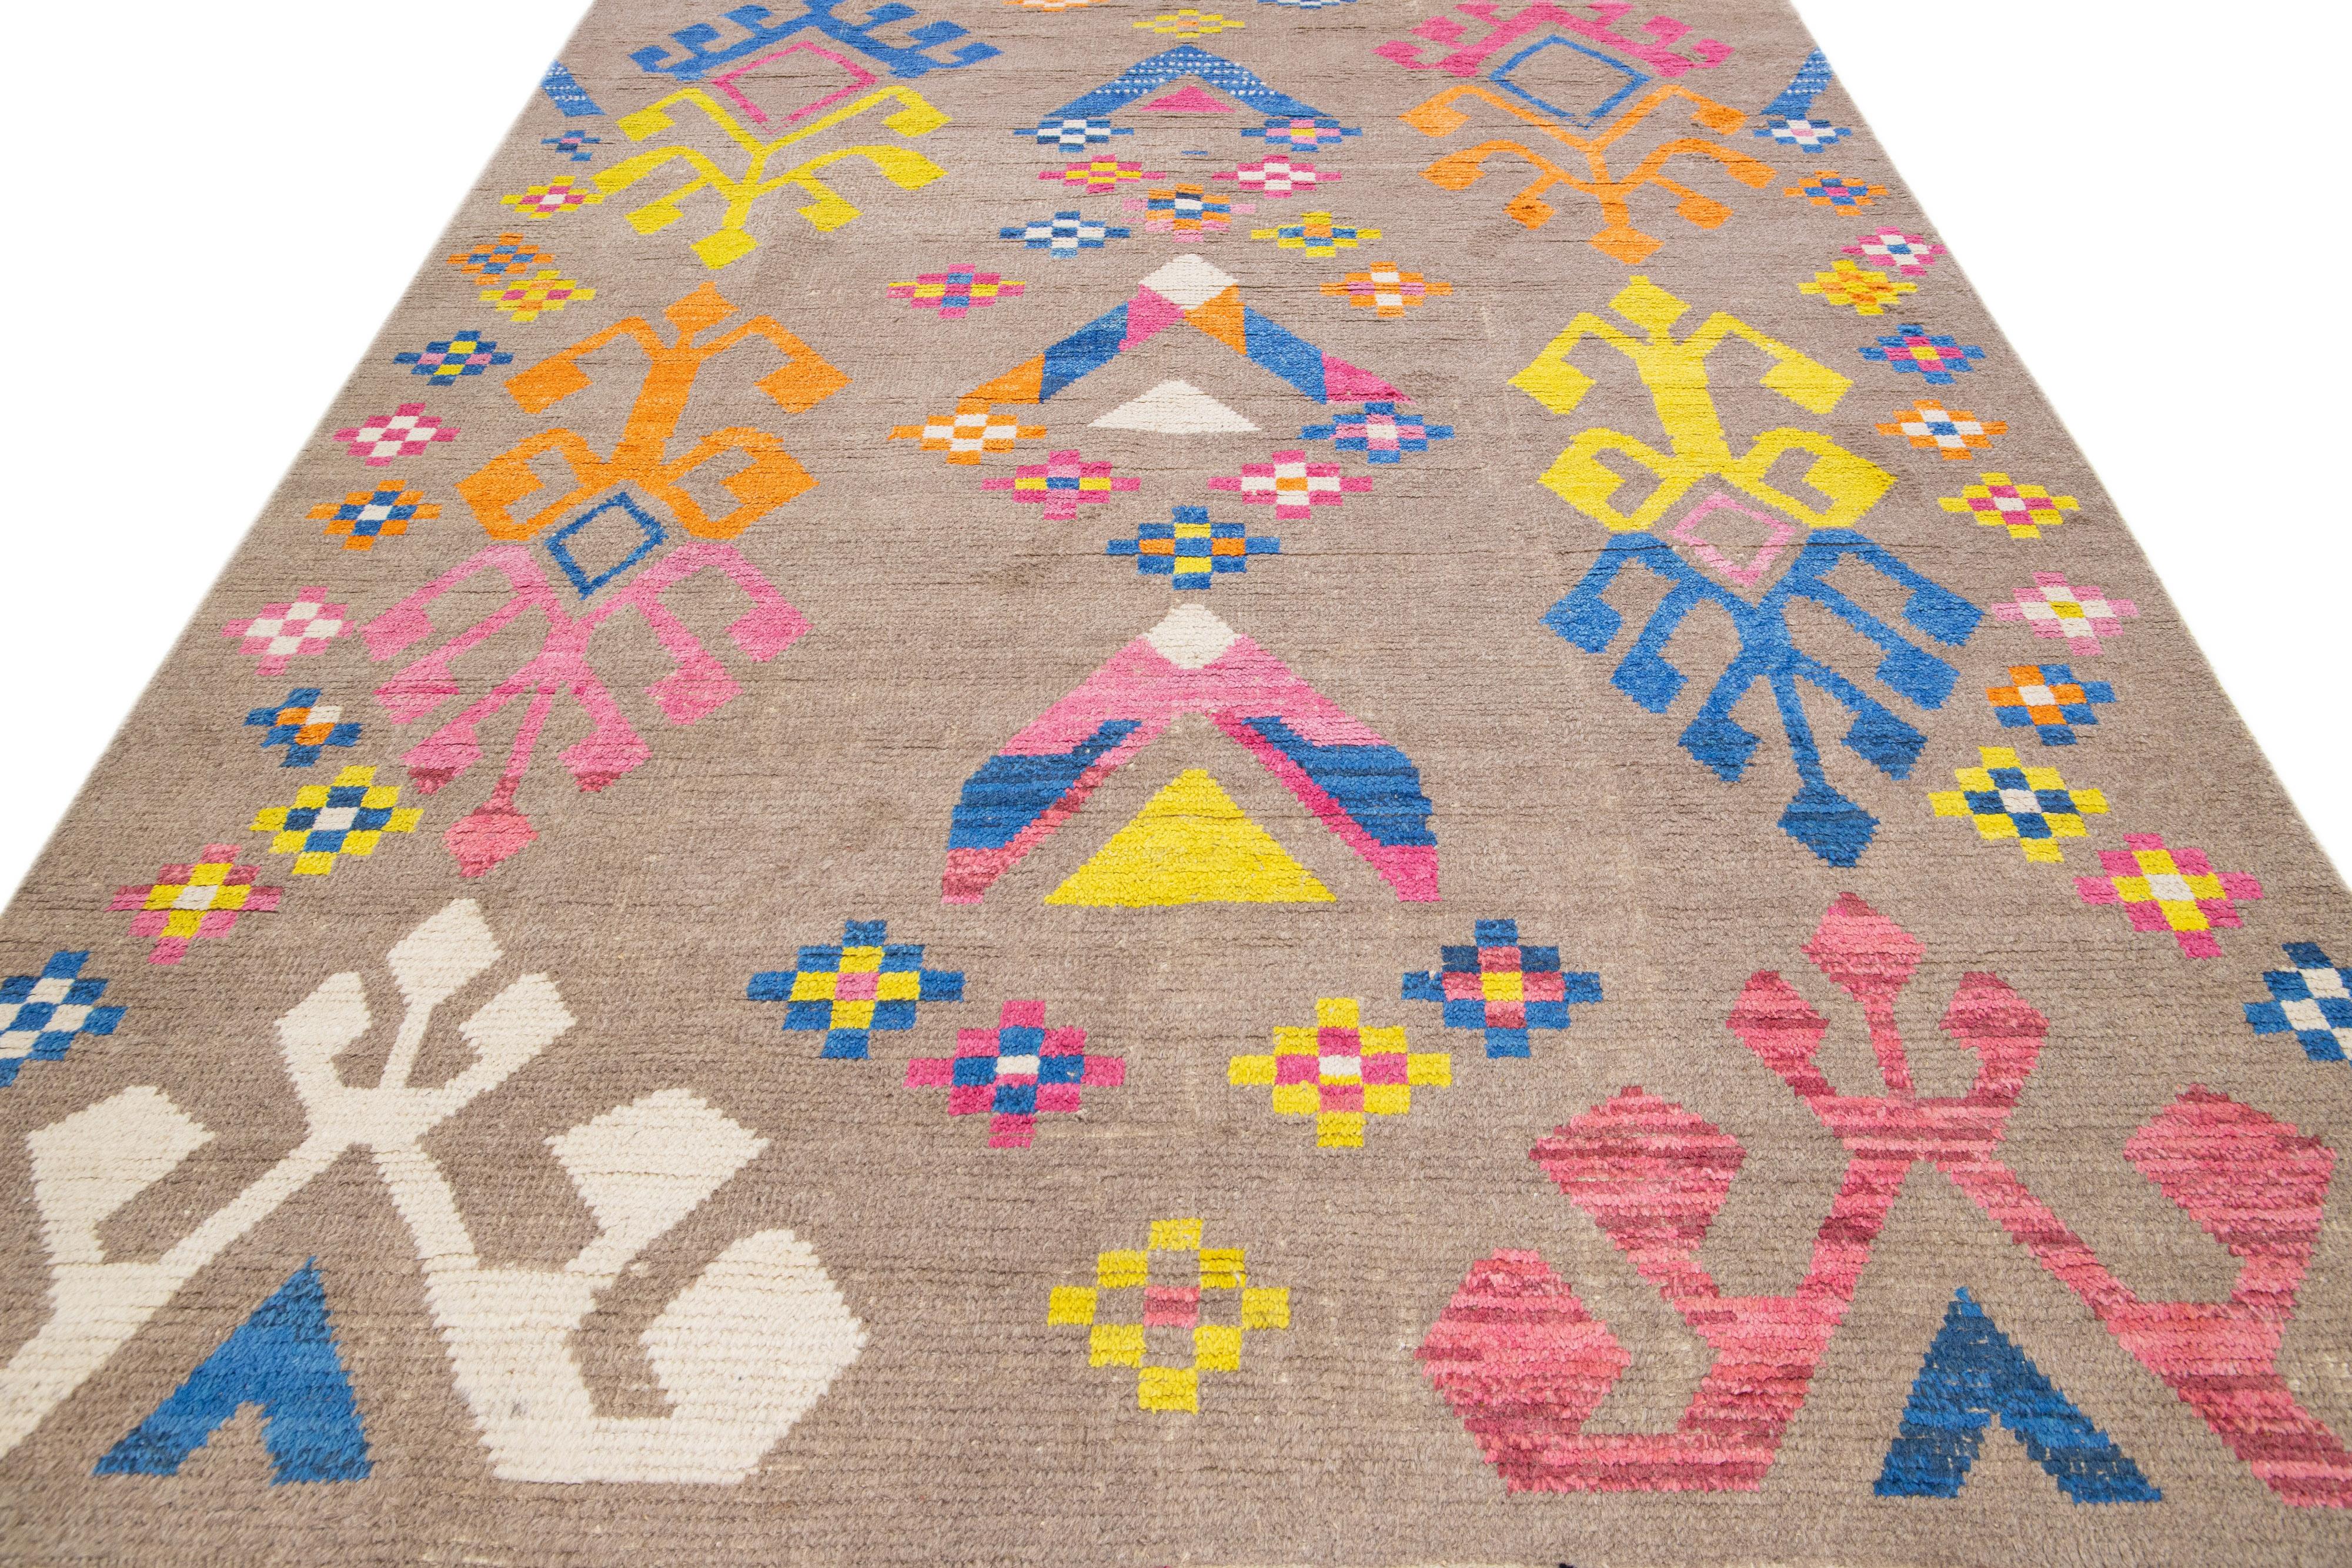 Beautiful modern Moroccan-style hand-knotted wool rug with a beige field and fringes on the top and bottom end. This piece has orange, blue, gray, and yellow accent colors in a gorgeous tribal design.

This rug measures 8' x 10'5